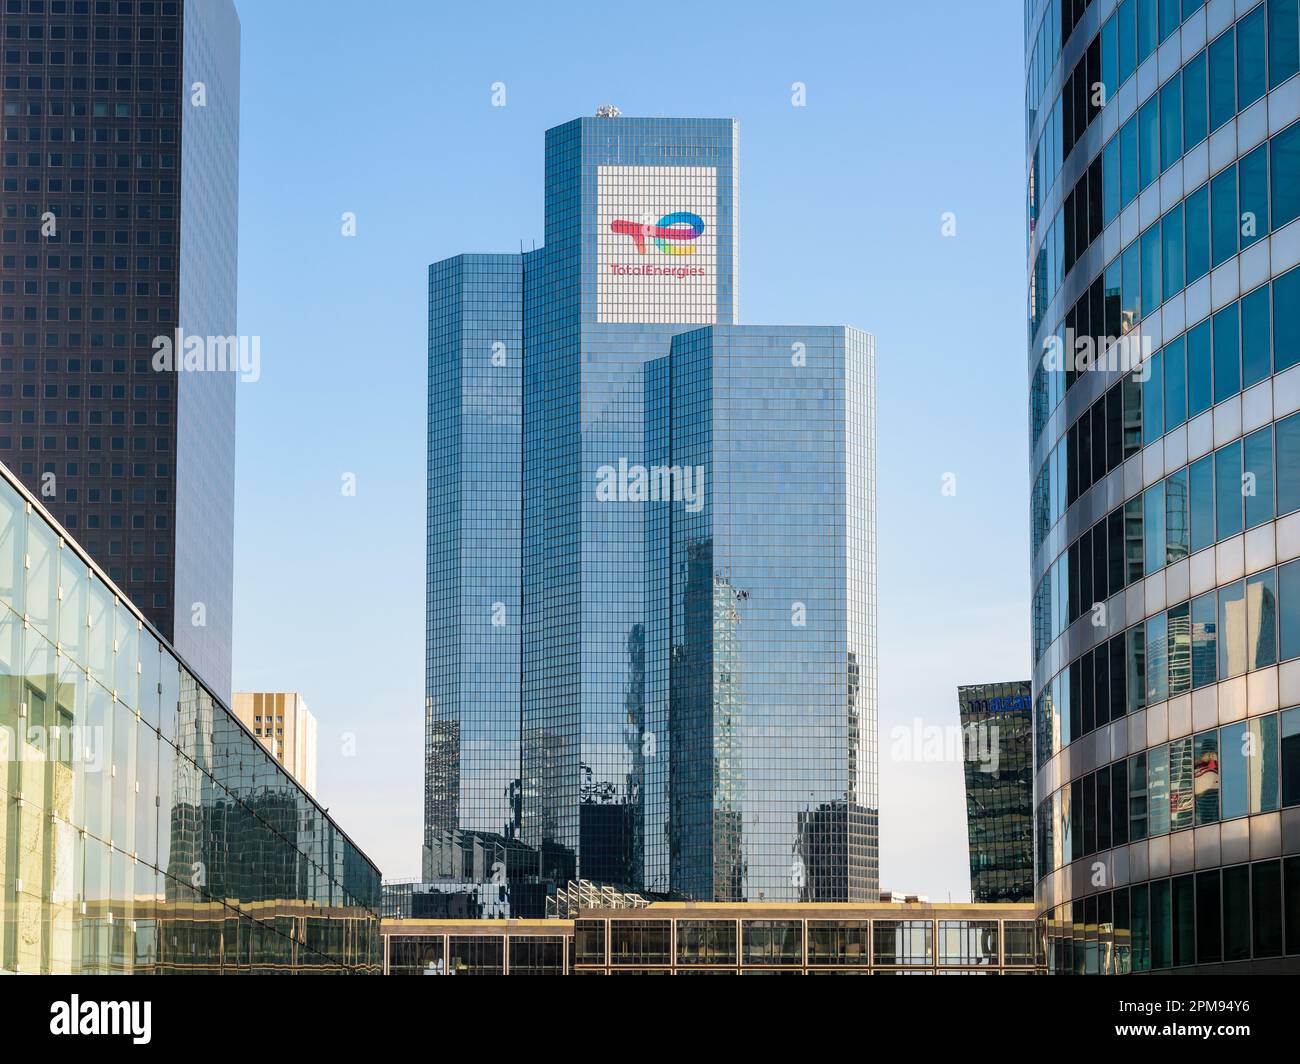 General view of the Coupole tower, head office of the french oil company TotalEnergies in Paris La Defense business district. Stock Photo